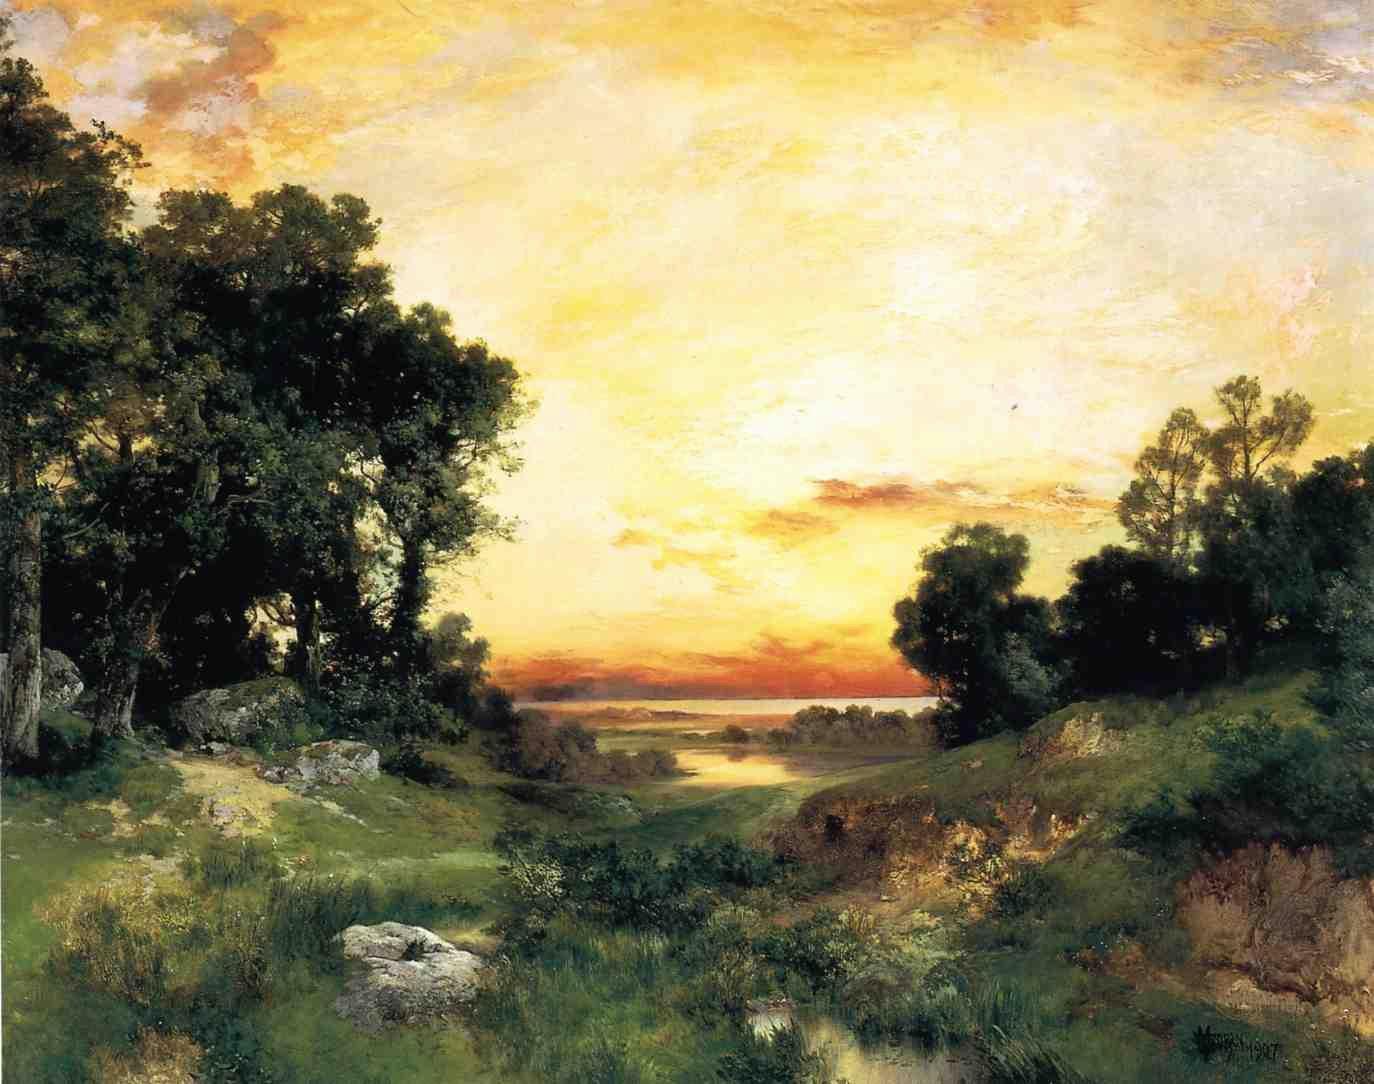 Sunset, Long Island Sound by Thomas Moran - 1907 - 78.74cm by 105.41cm Lauren Rogers Museum of Art